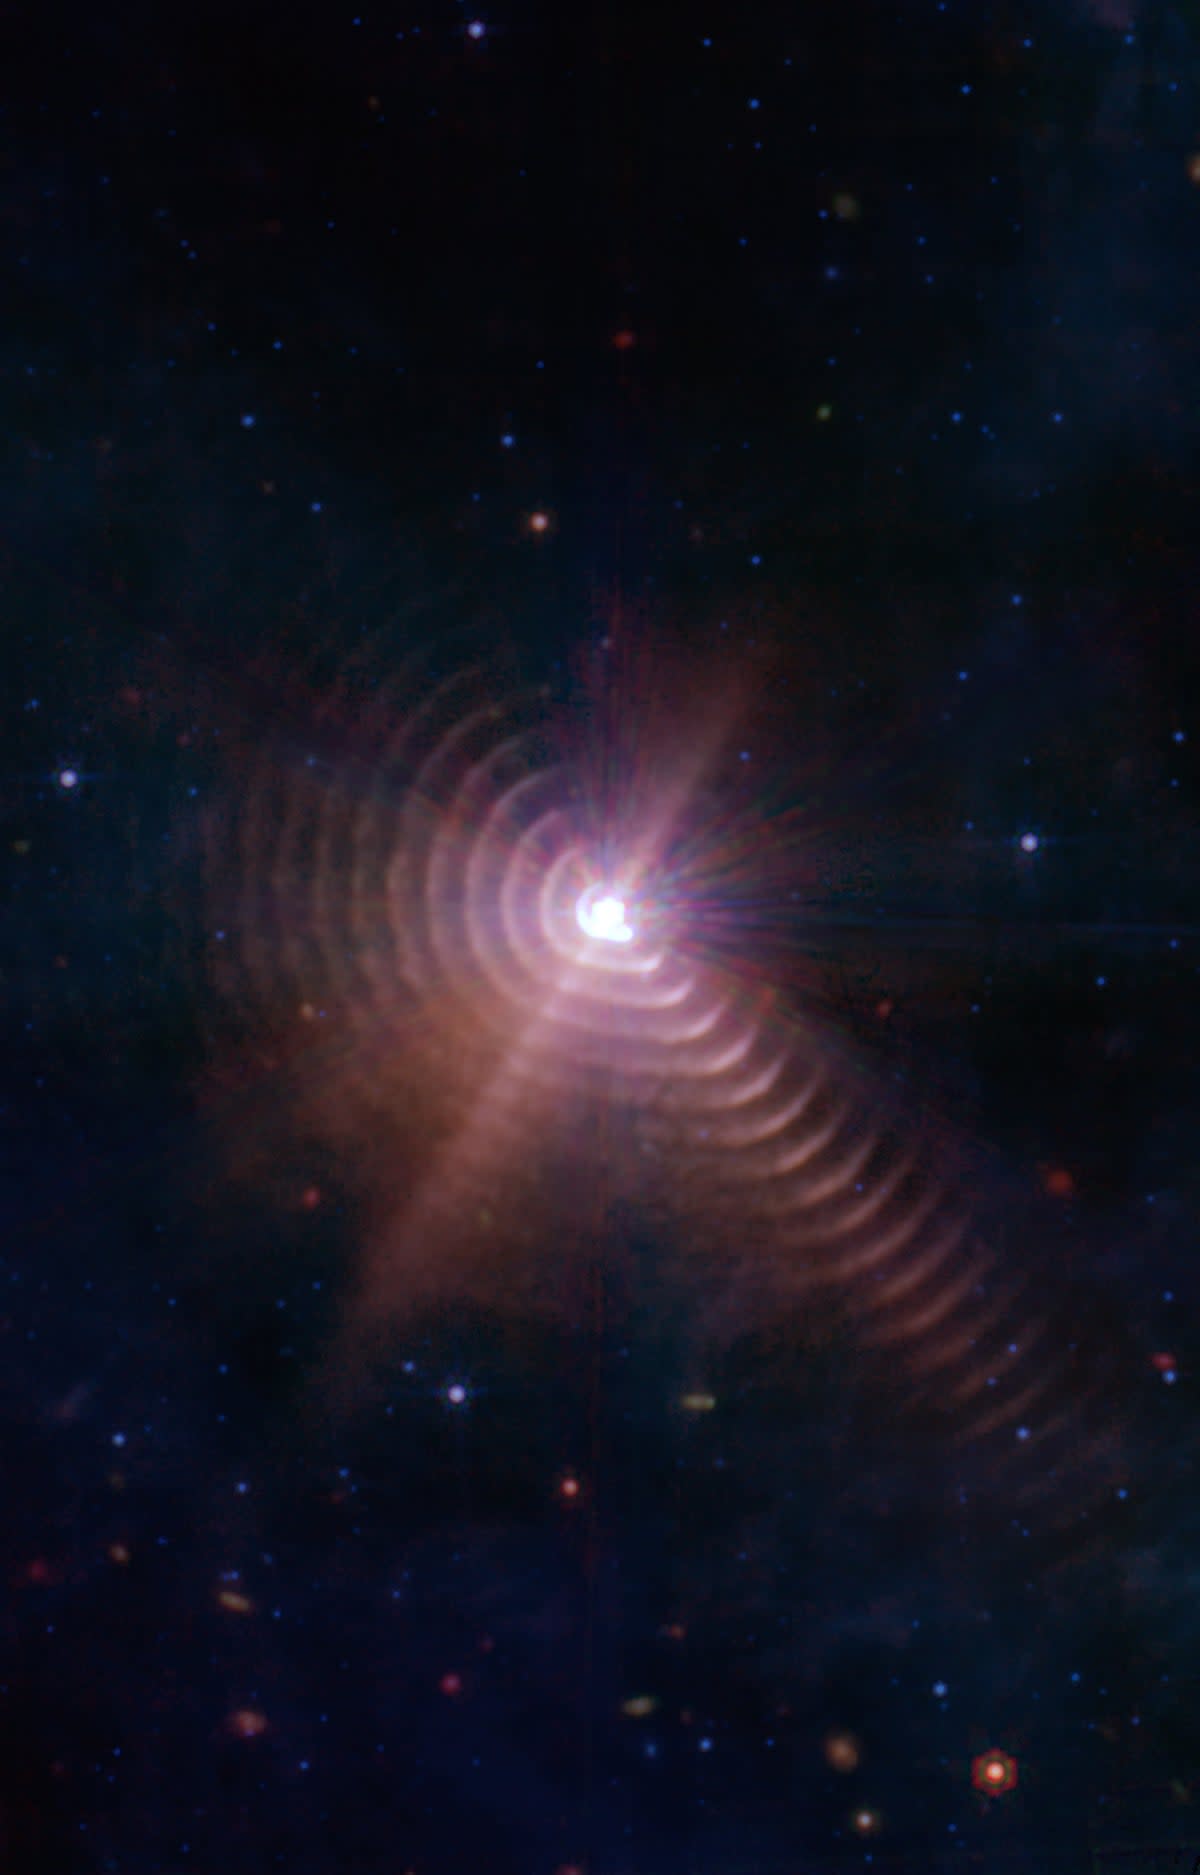 Rings of dust are blown away from the binary star WR140, pushed across the cosmos by powerful solar wind (NASA, ESA, CSA, STScI, JPL-Caltech)